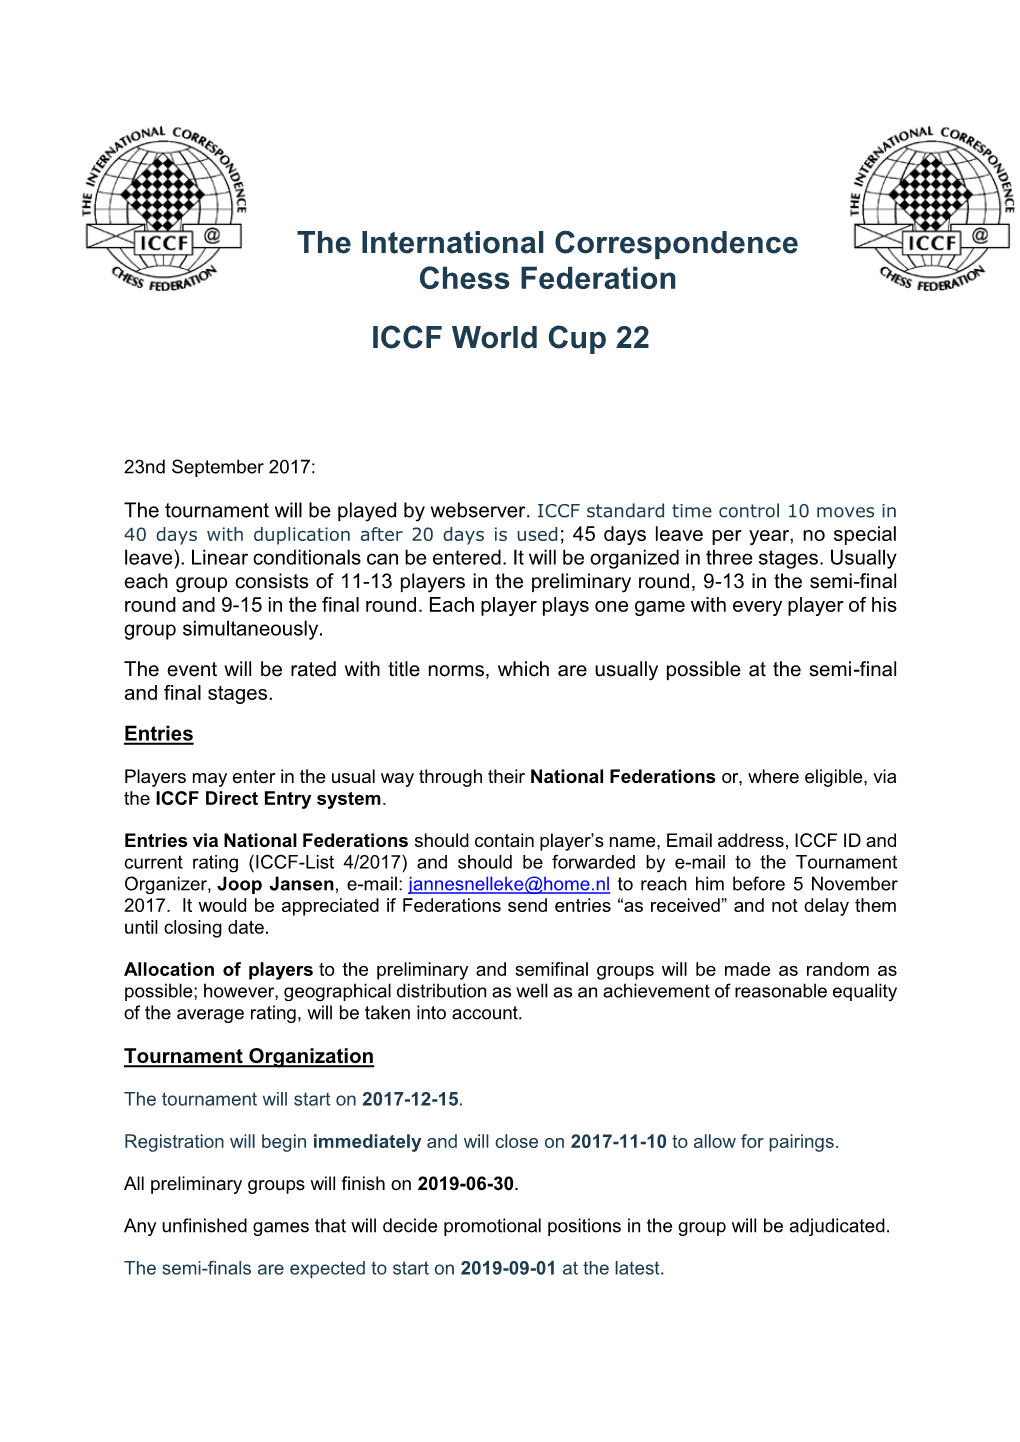 The International Correspondence Chess Federation ICCF World Cup 22